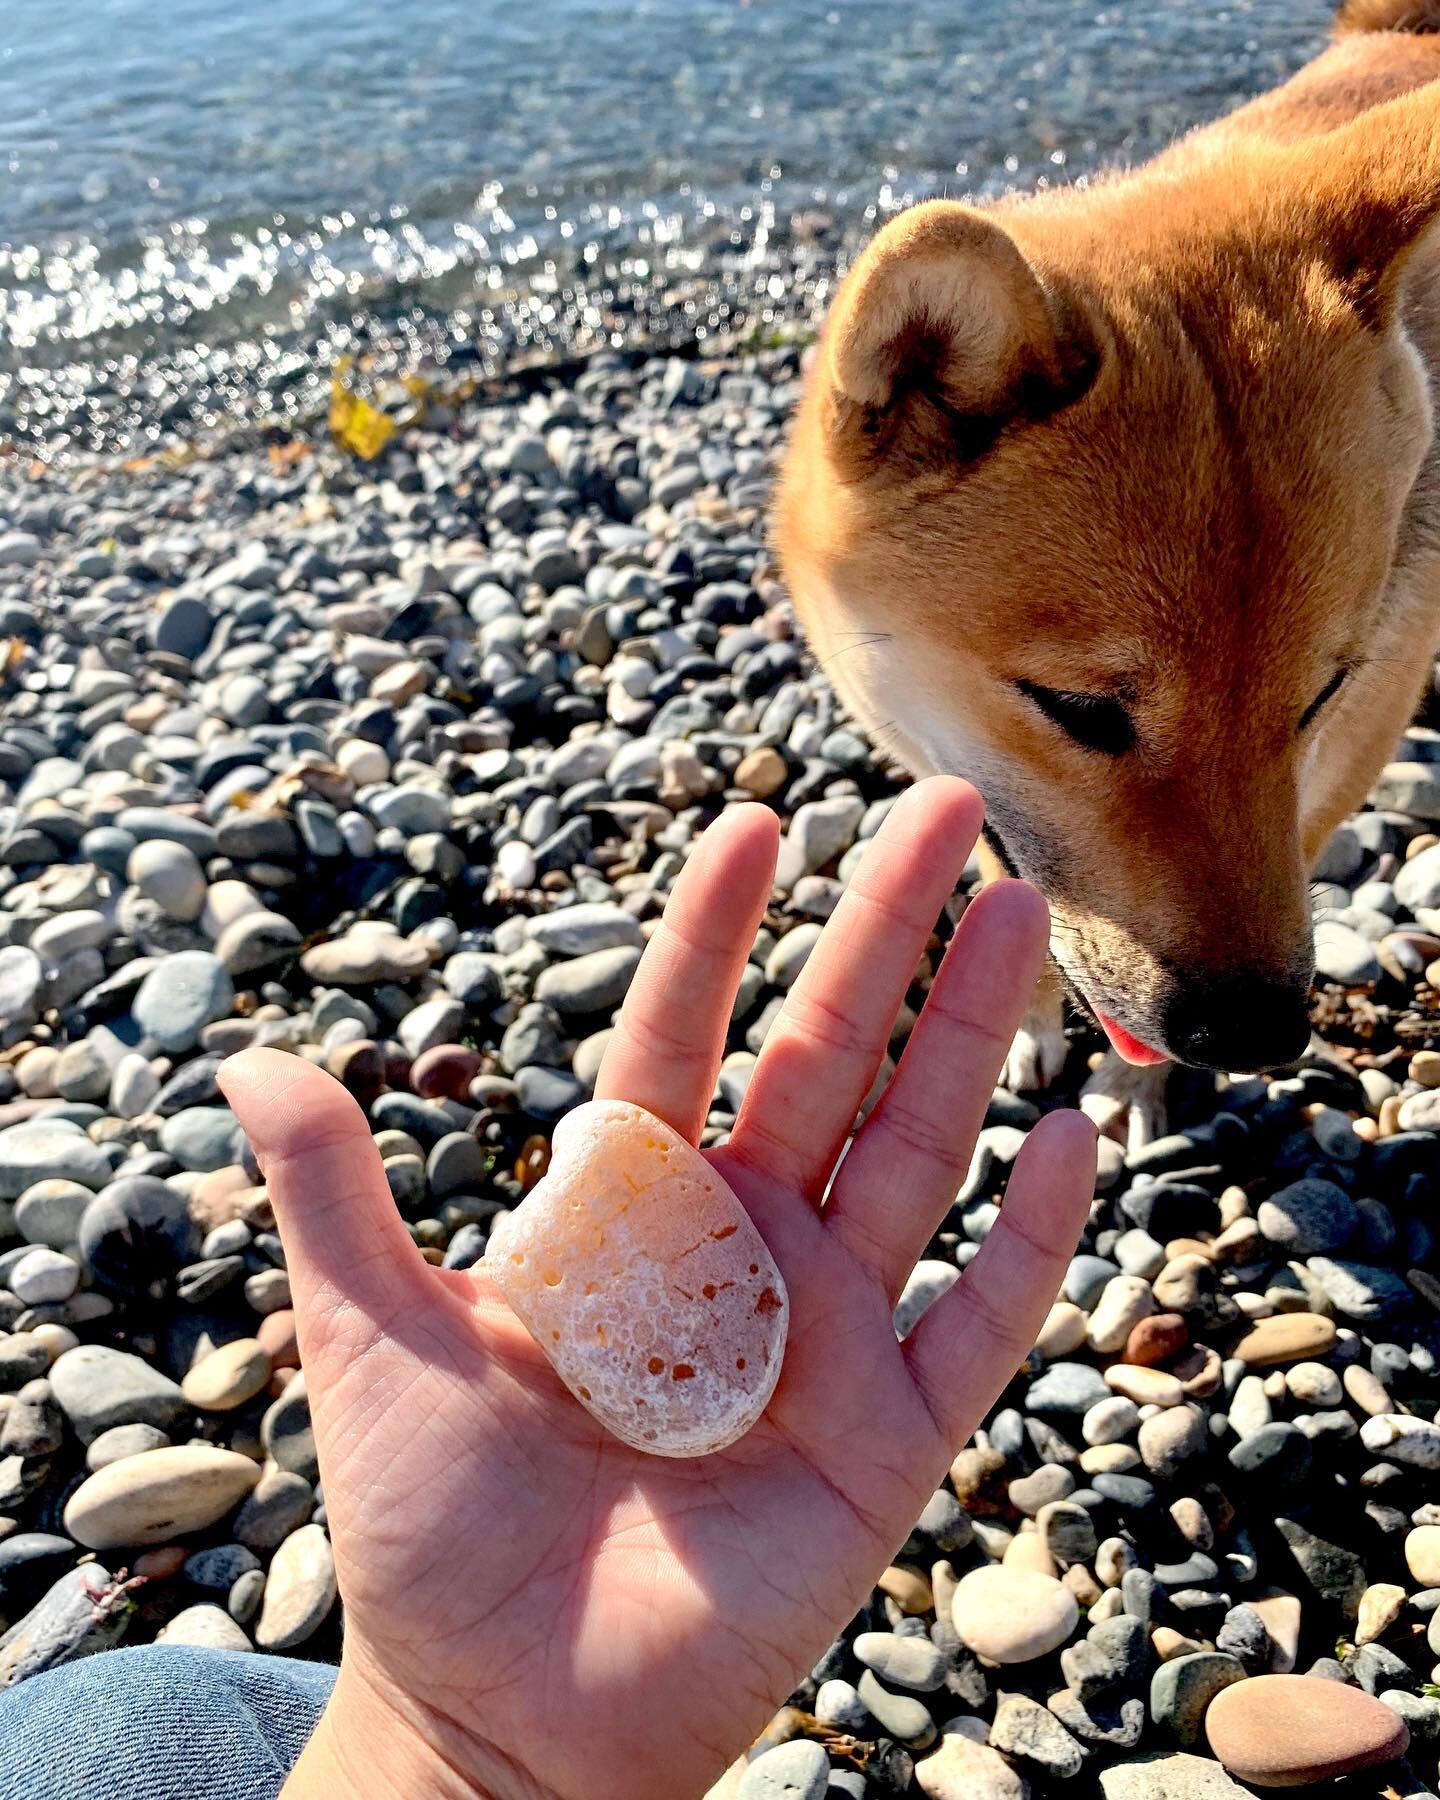 Swooning over this peach agate with our rockhound 🍑

#nature #photography #agate #rockhound #pnw #pacificnorthwest #naturephotography #love #travel #lummiisland #instagood #landscape #beautiful #naturelovers #picoftheday #art #photo  #wildlife #trav